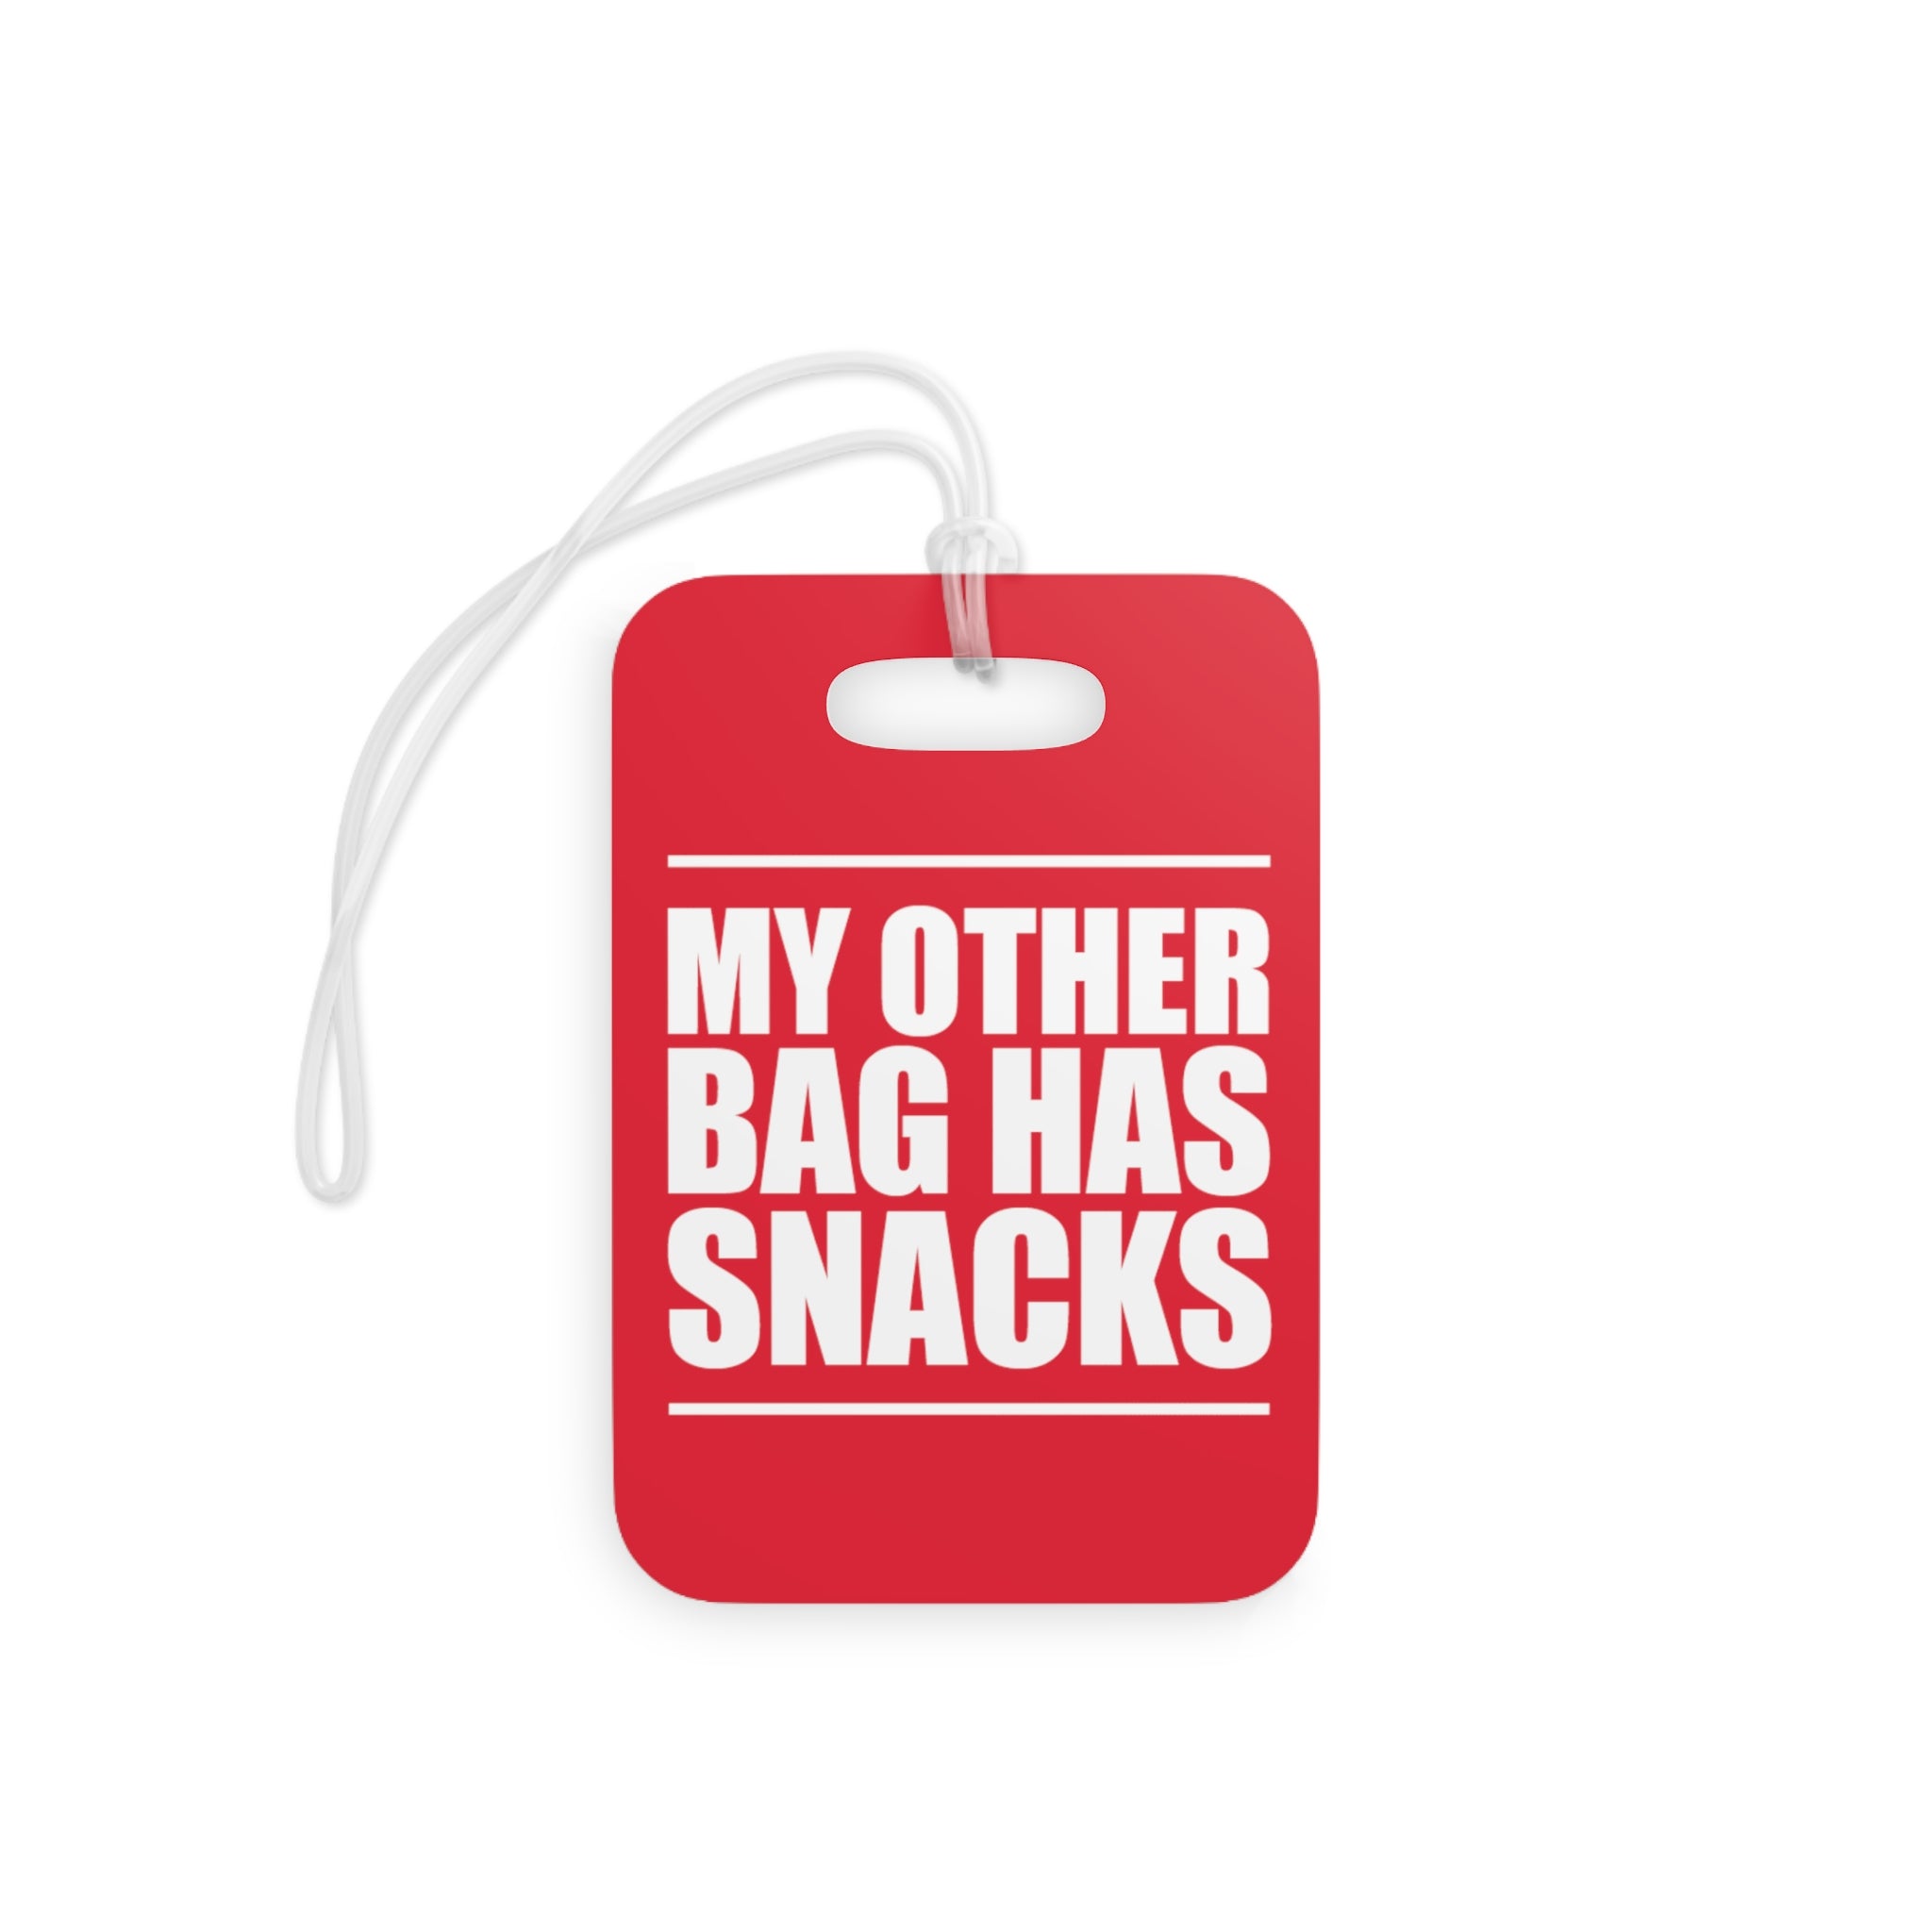 My other bag has snacks Luggage Tag (Red)